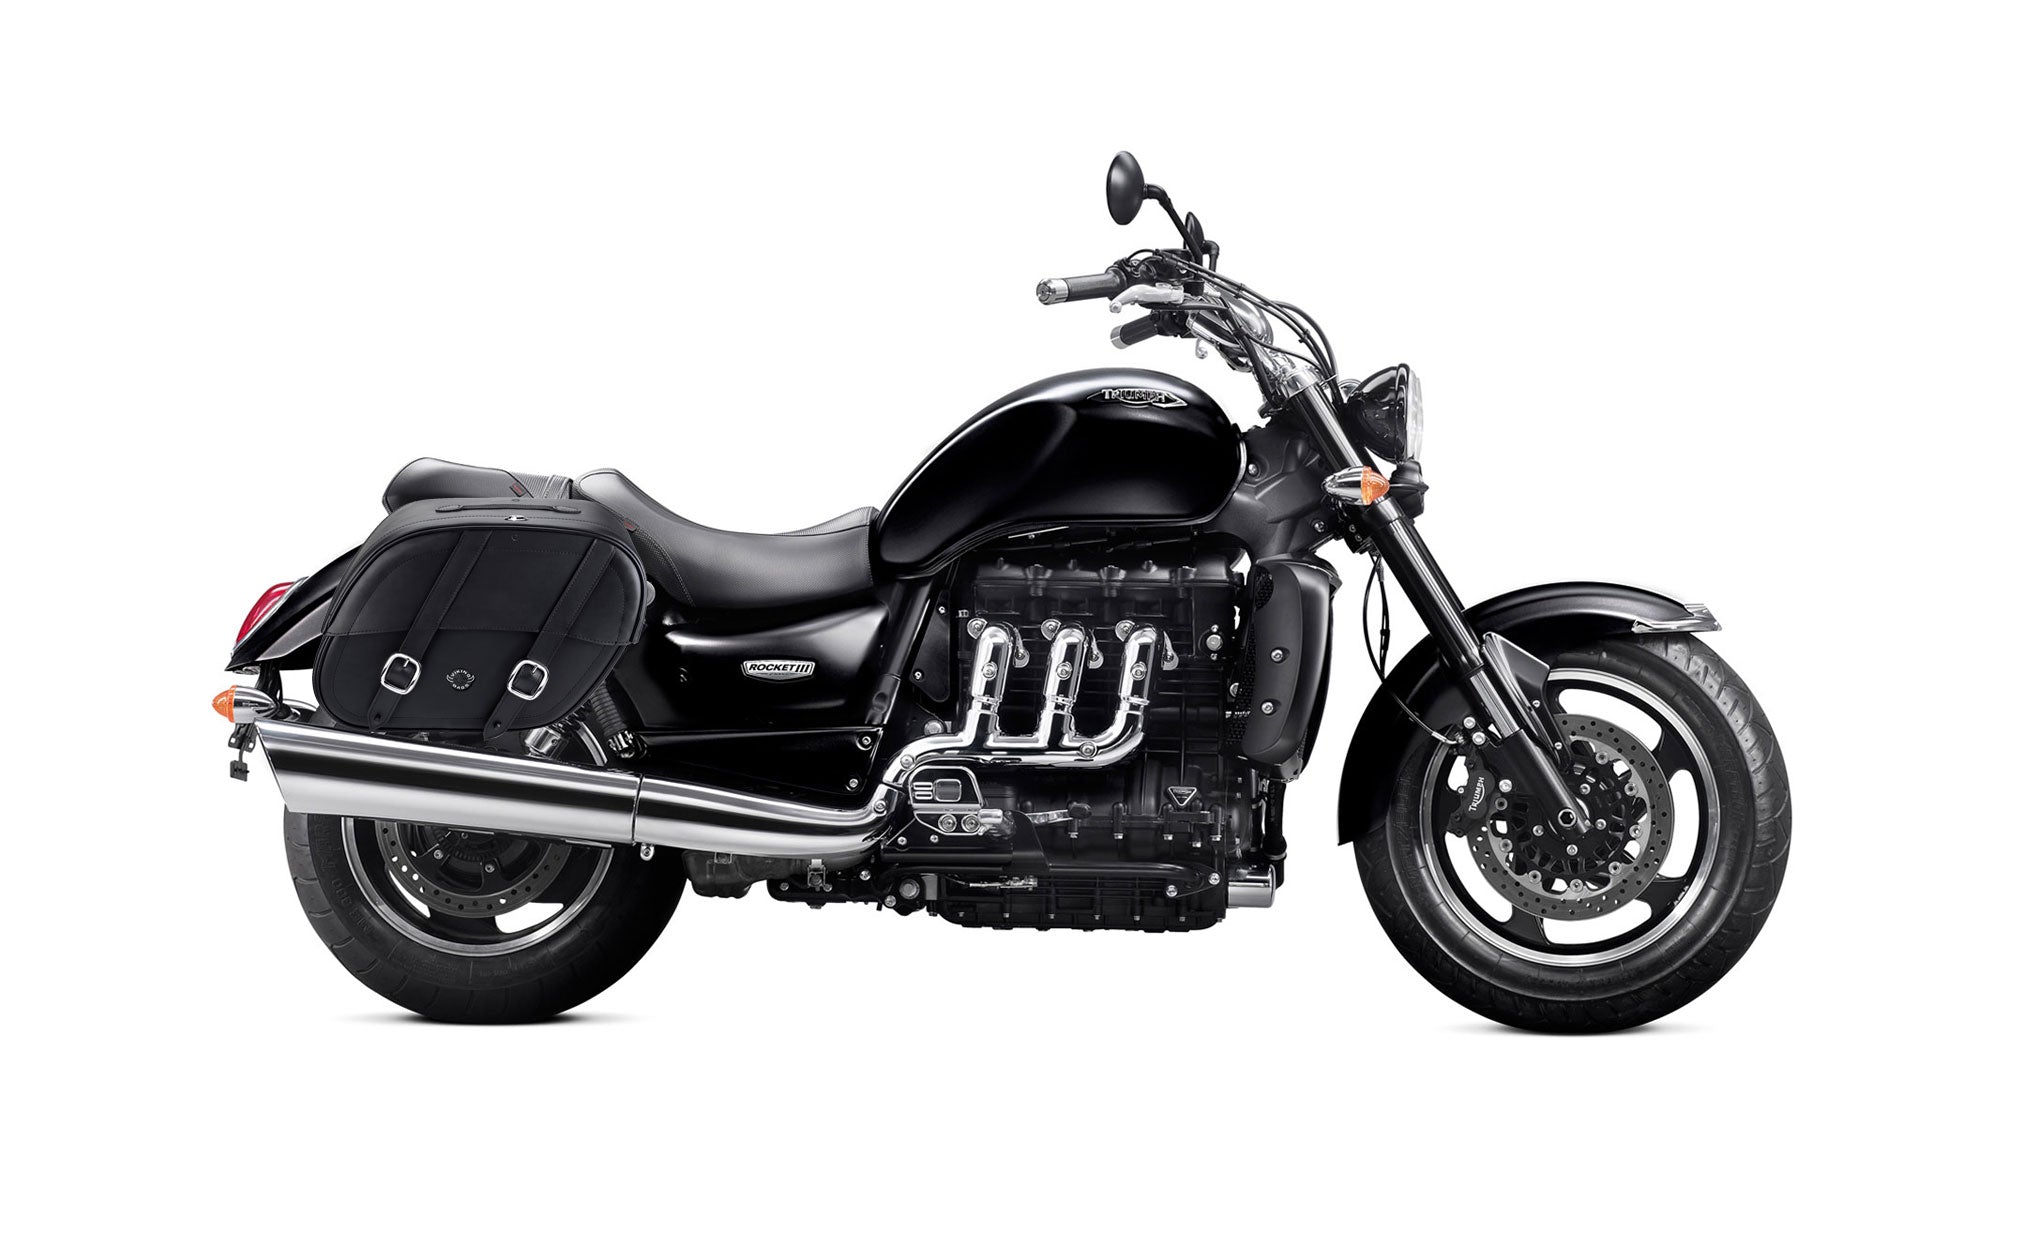 Viking Club Large Triumph Rocket Iii Classic Shock Cut Out Leather Motorcycle Saddlebags on Bike Photo @expand